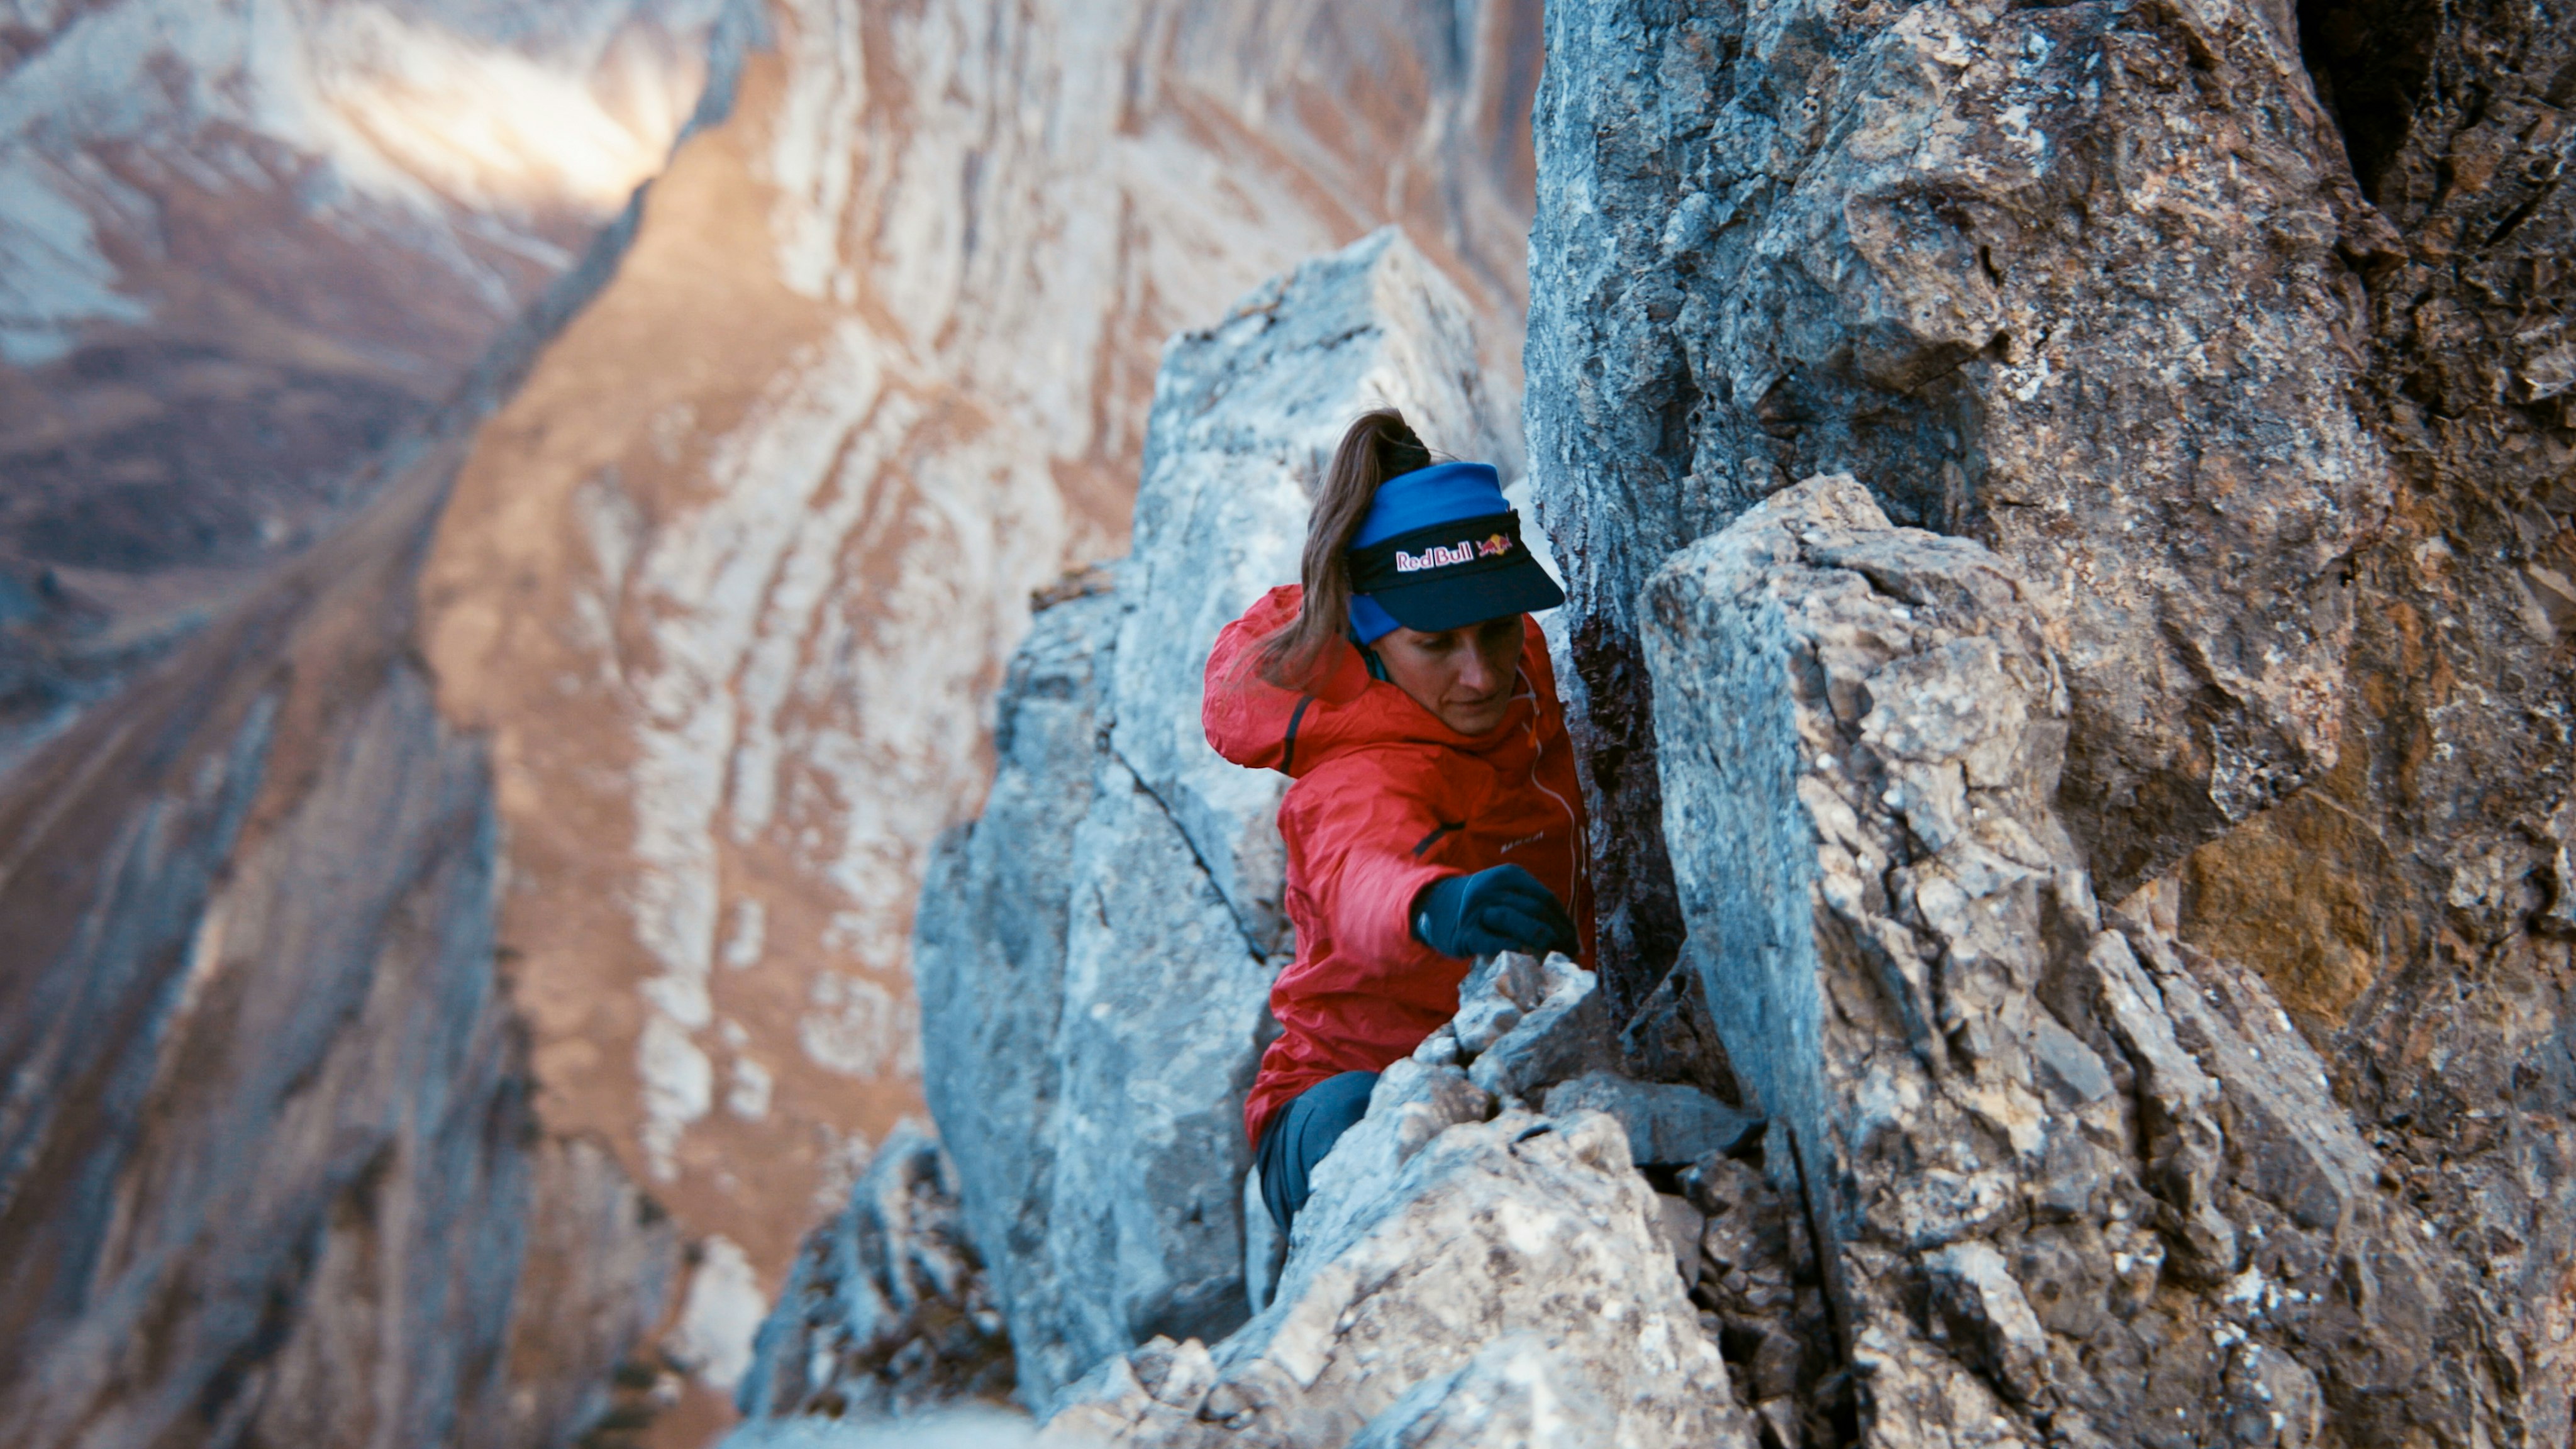 Nadine climbing in Mammut clothes